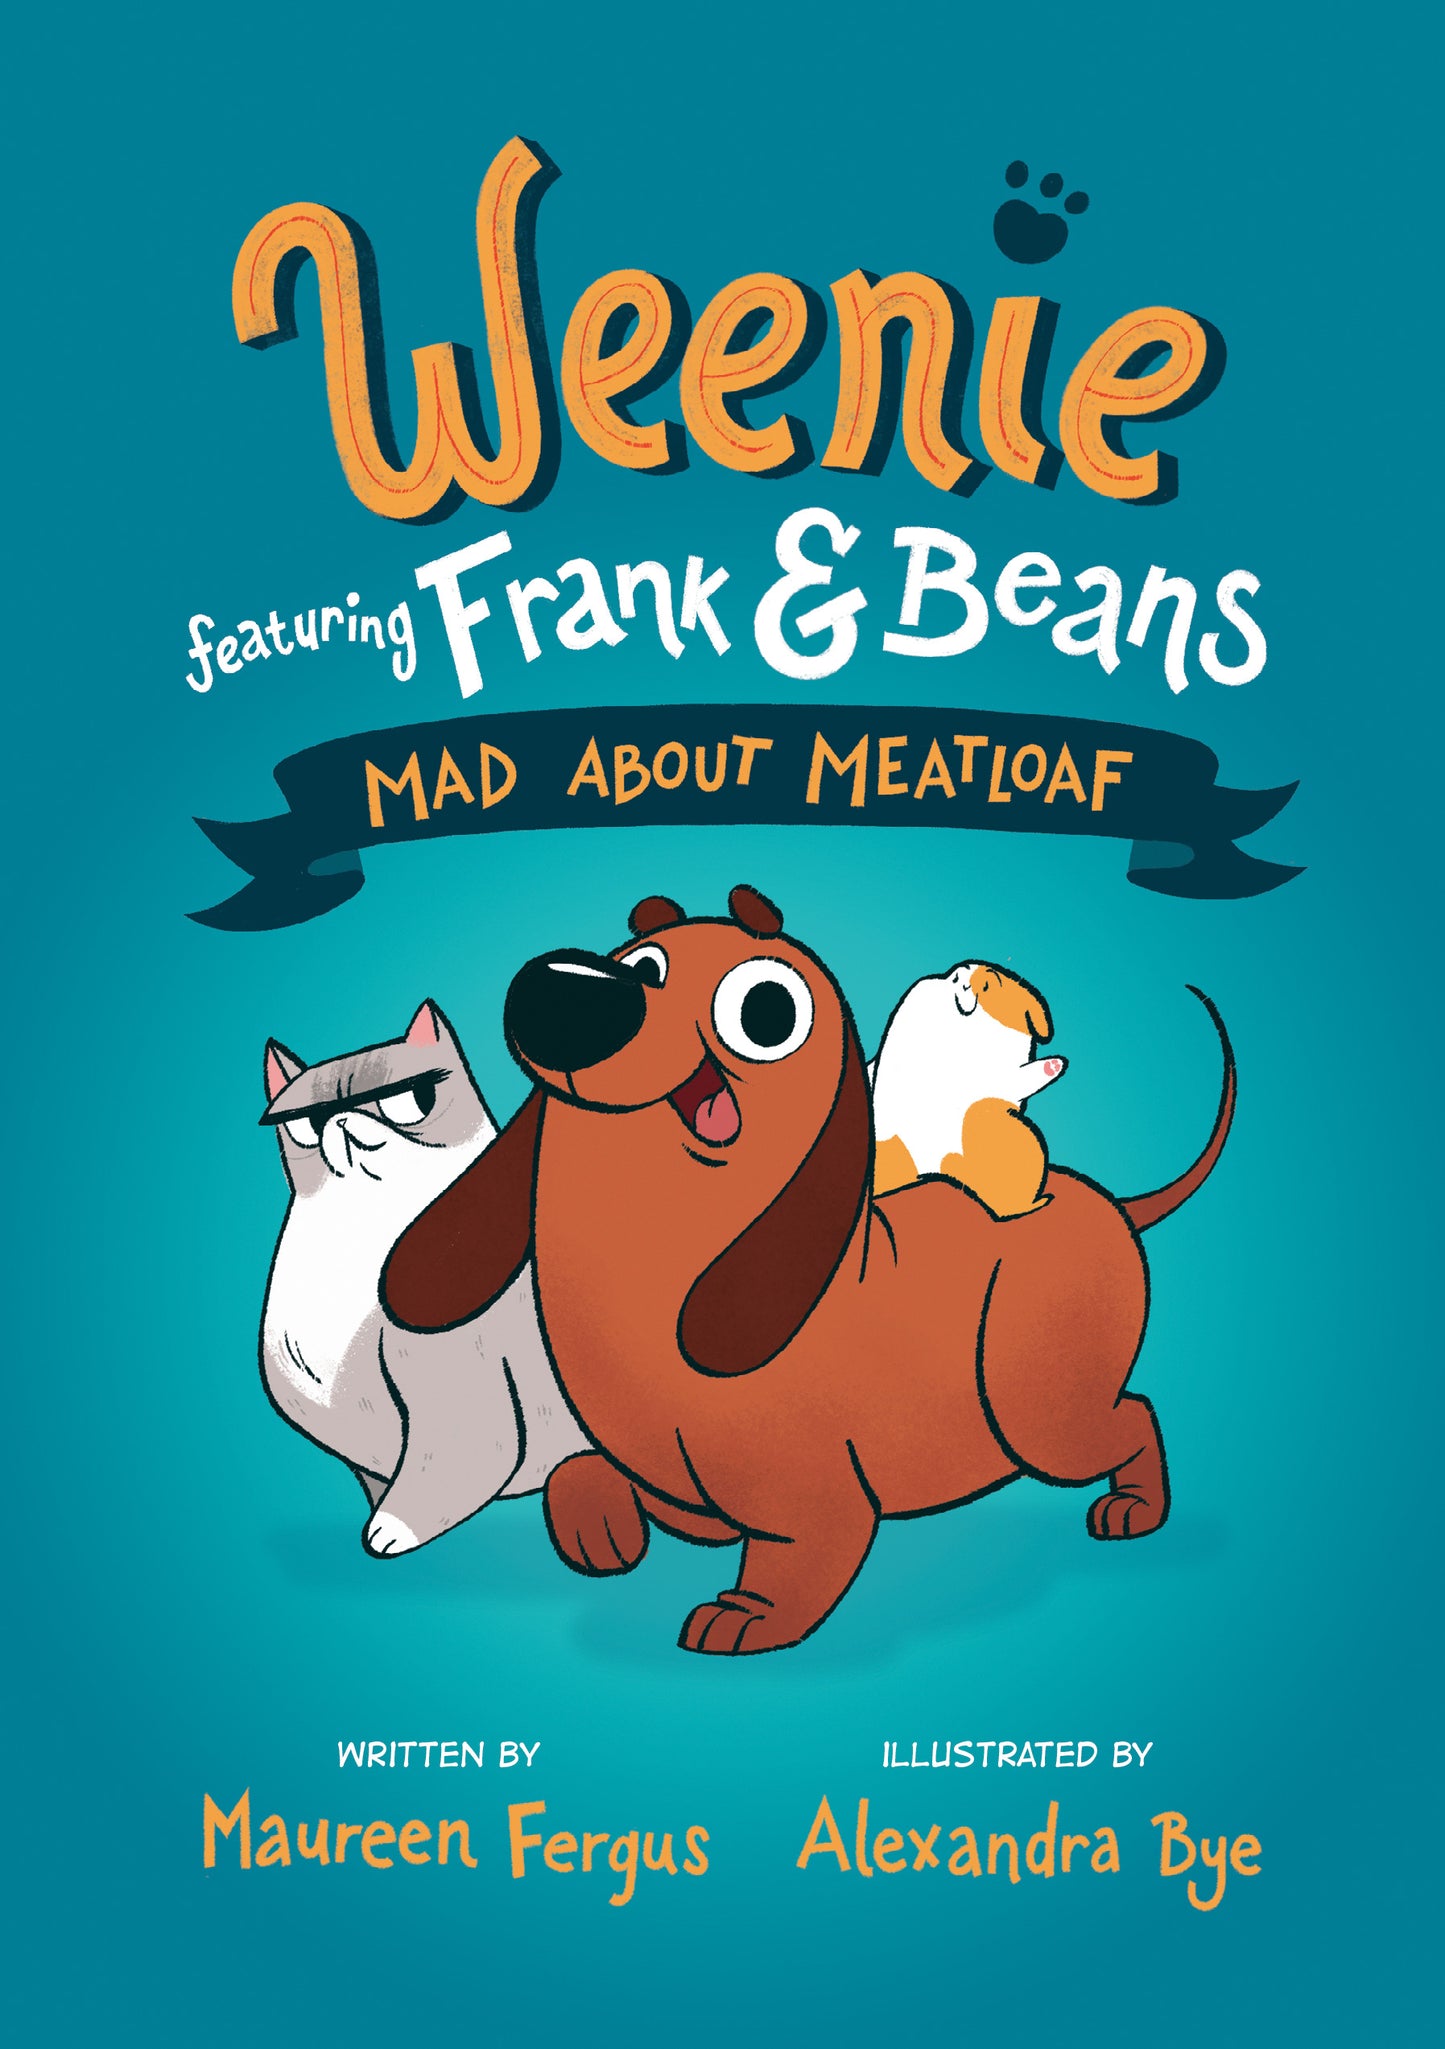 Mad About Meatloaf (Weenie Featuring Frank and Beans Book #1)